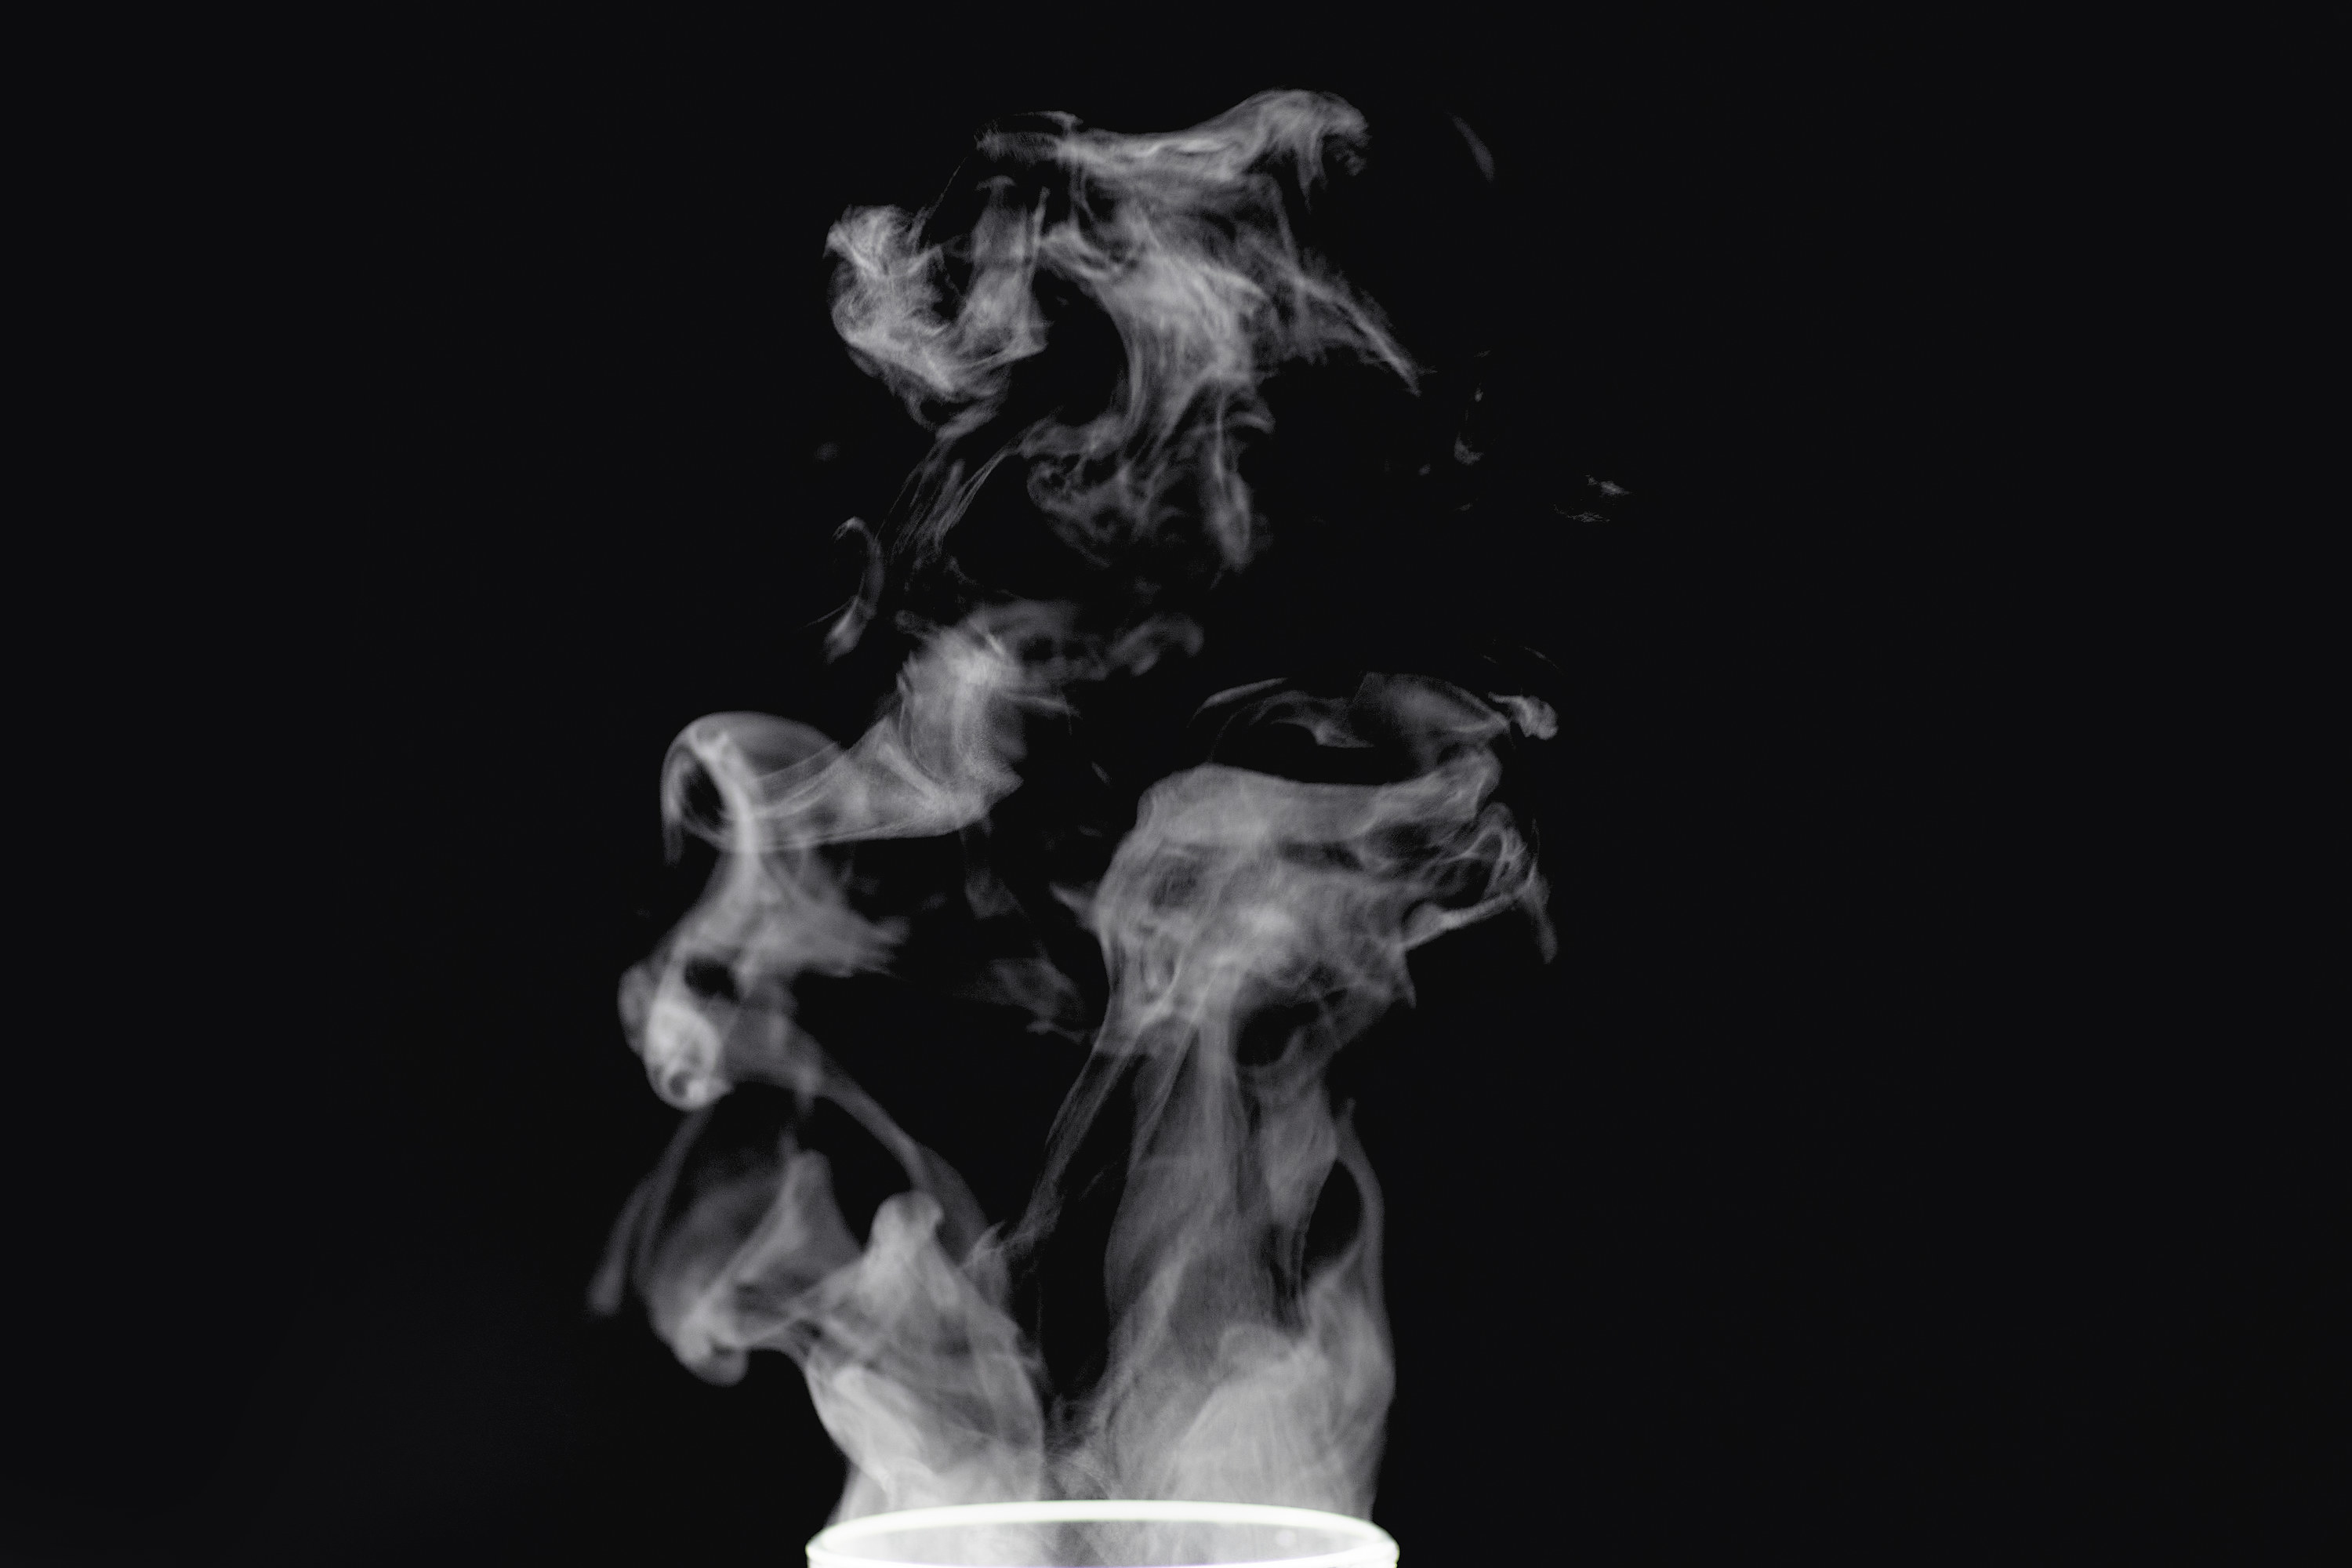 Smoke in the air against a black background